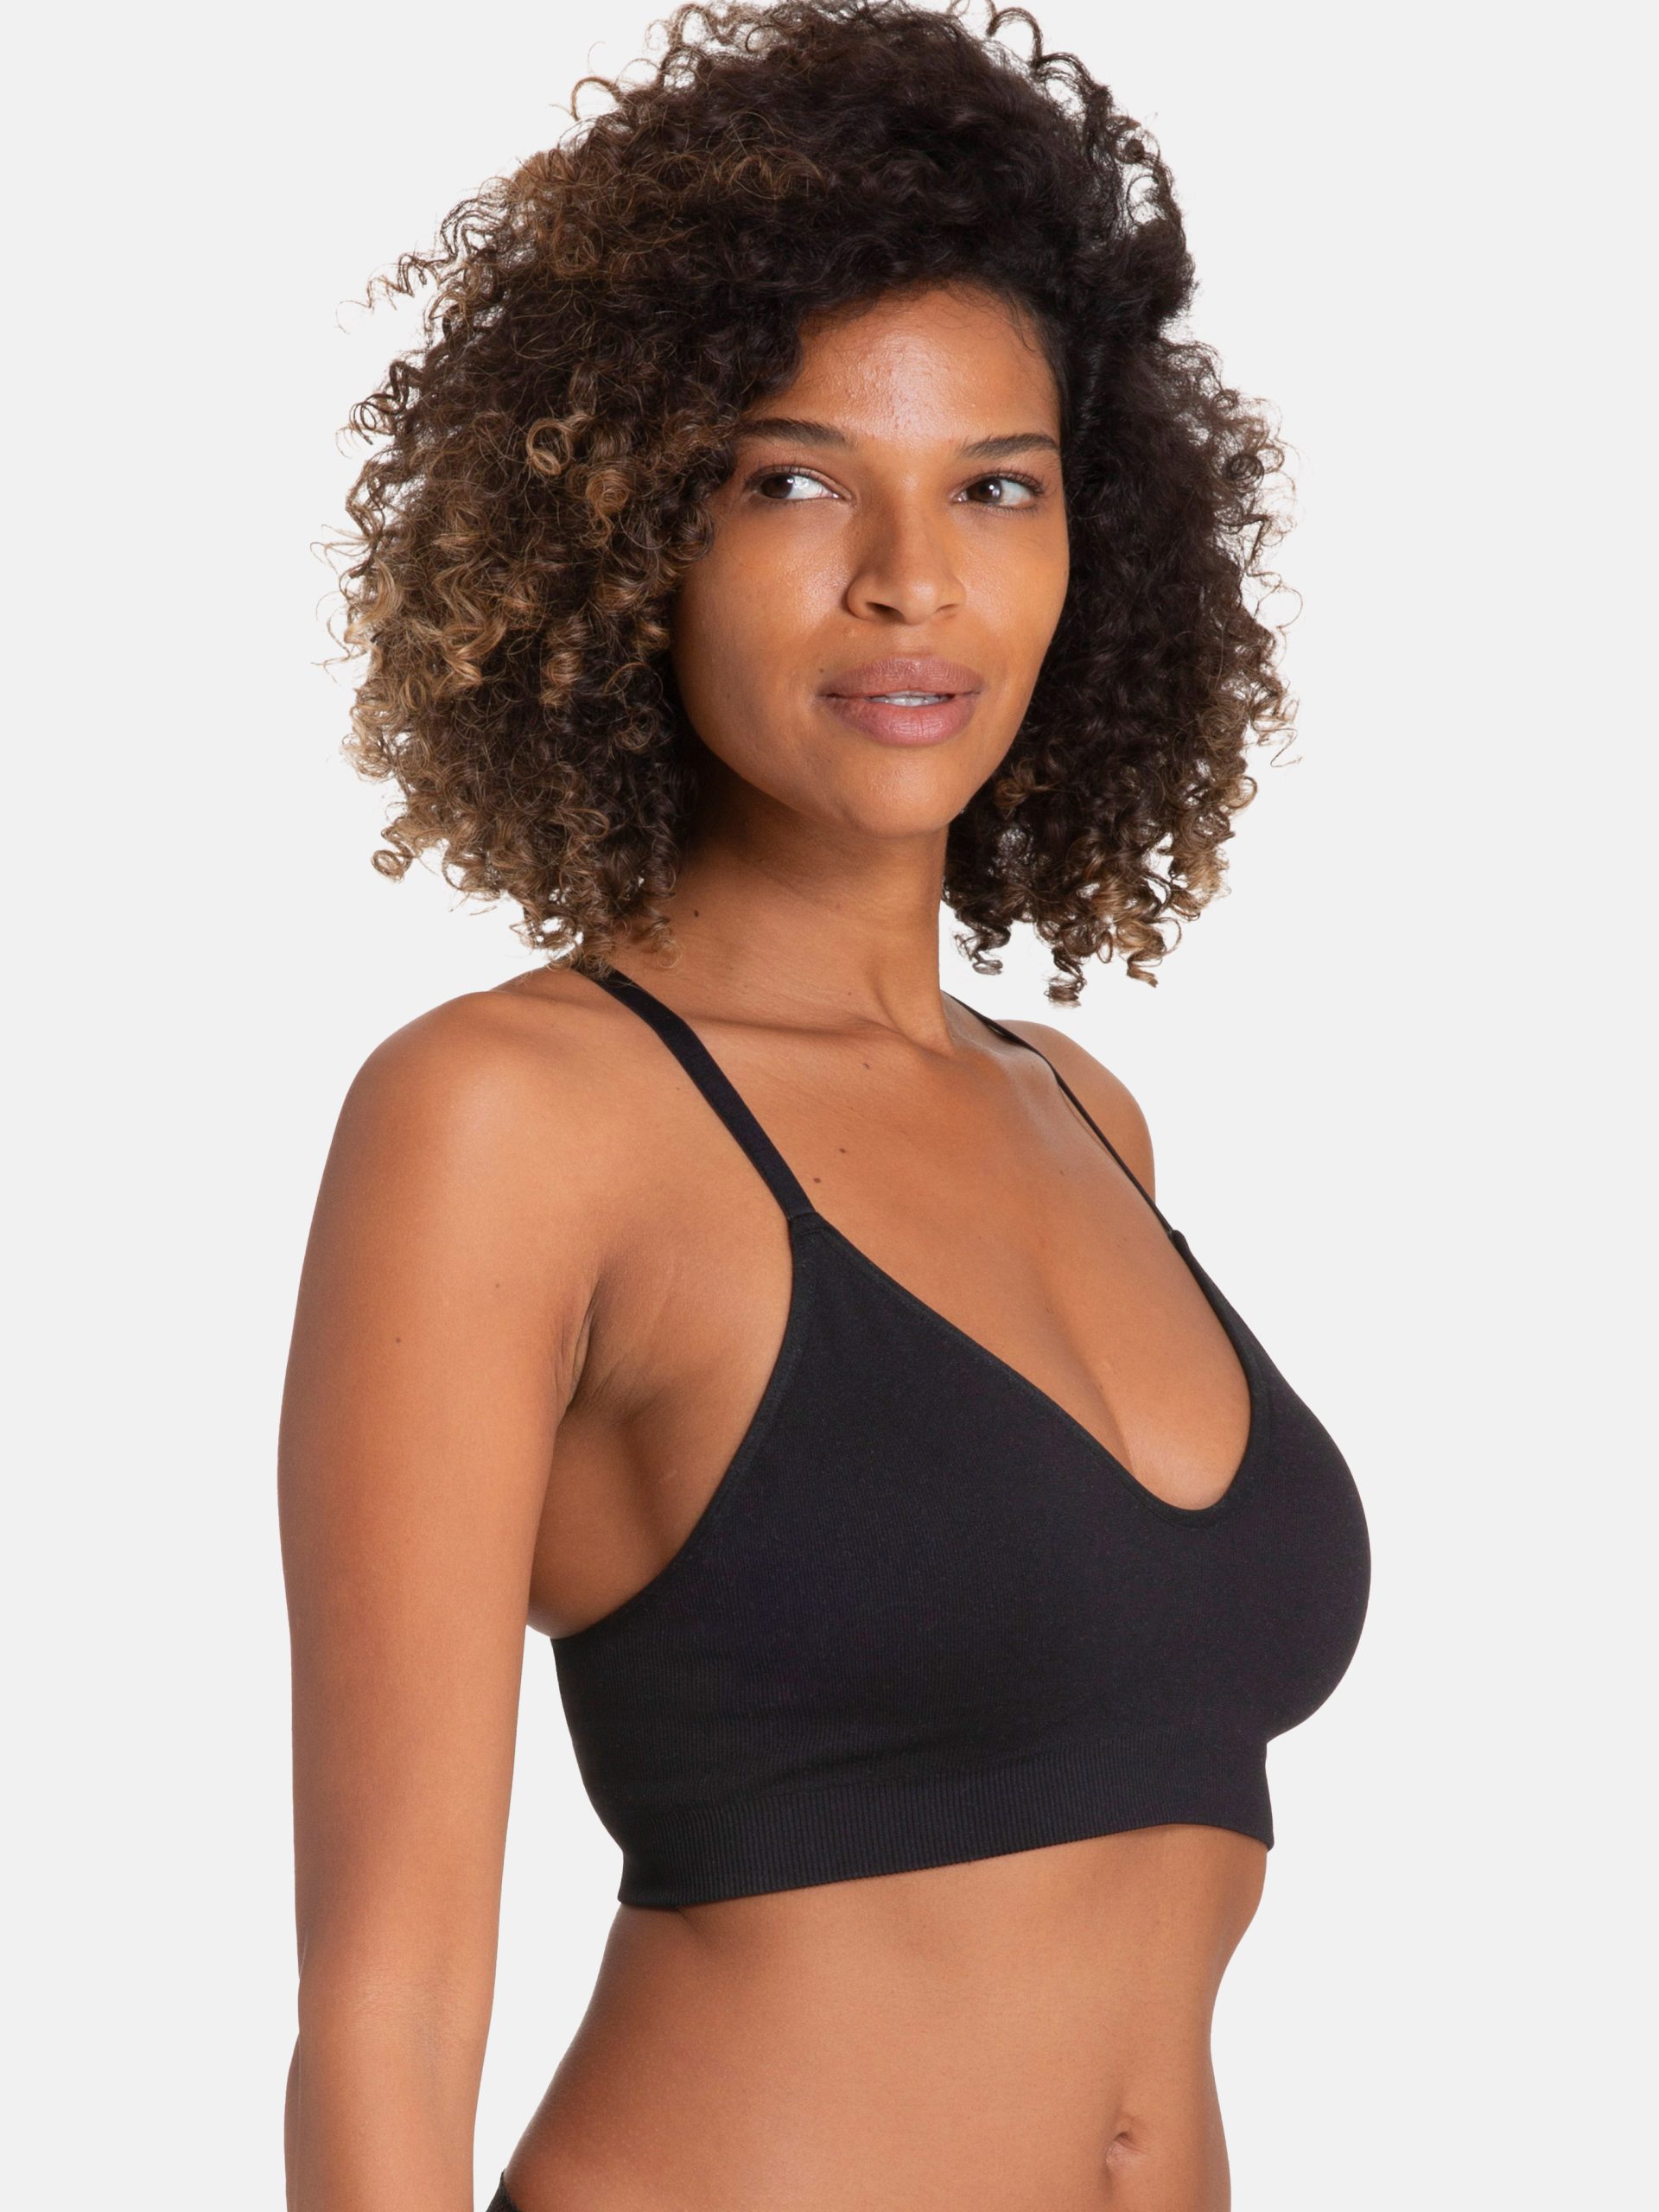 Dorina Revive nylon blend seamless bralette with removeable pads